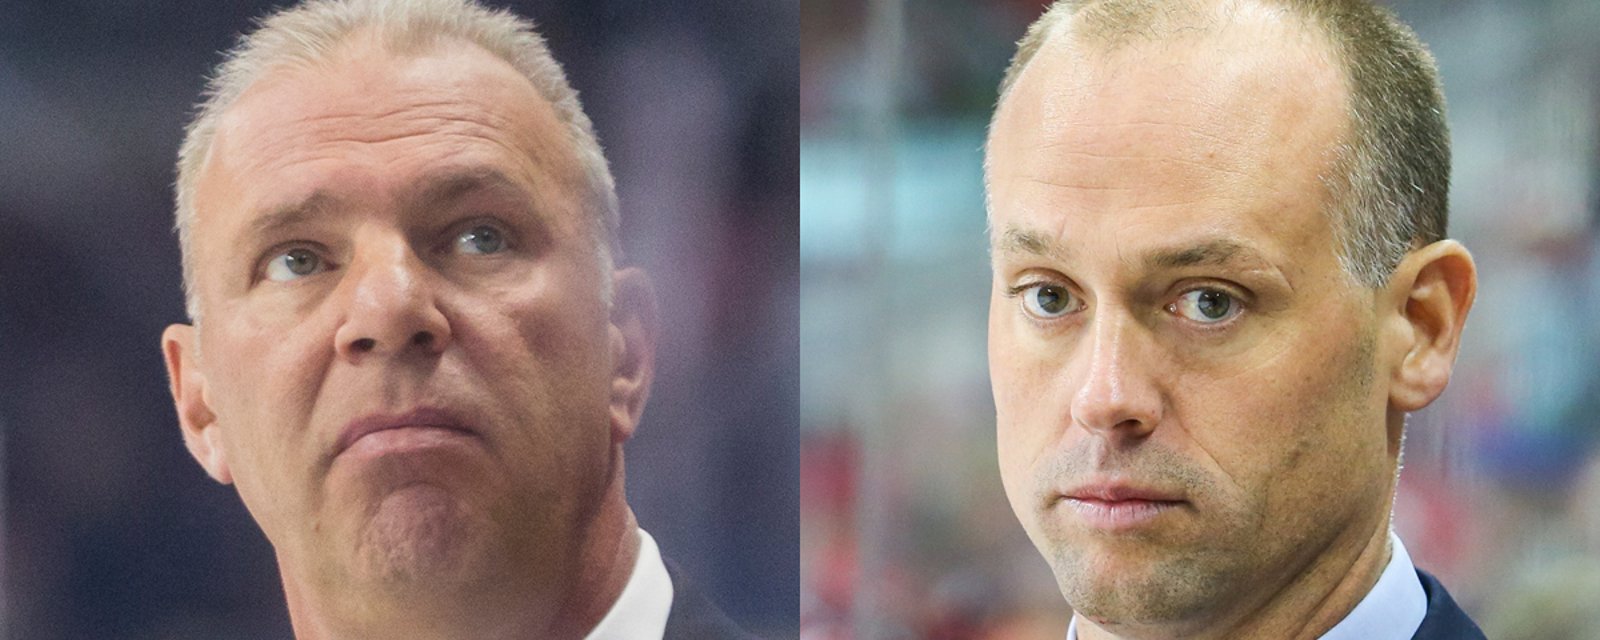 Interesting link between Therrien and Blashill stories might hide something huge.